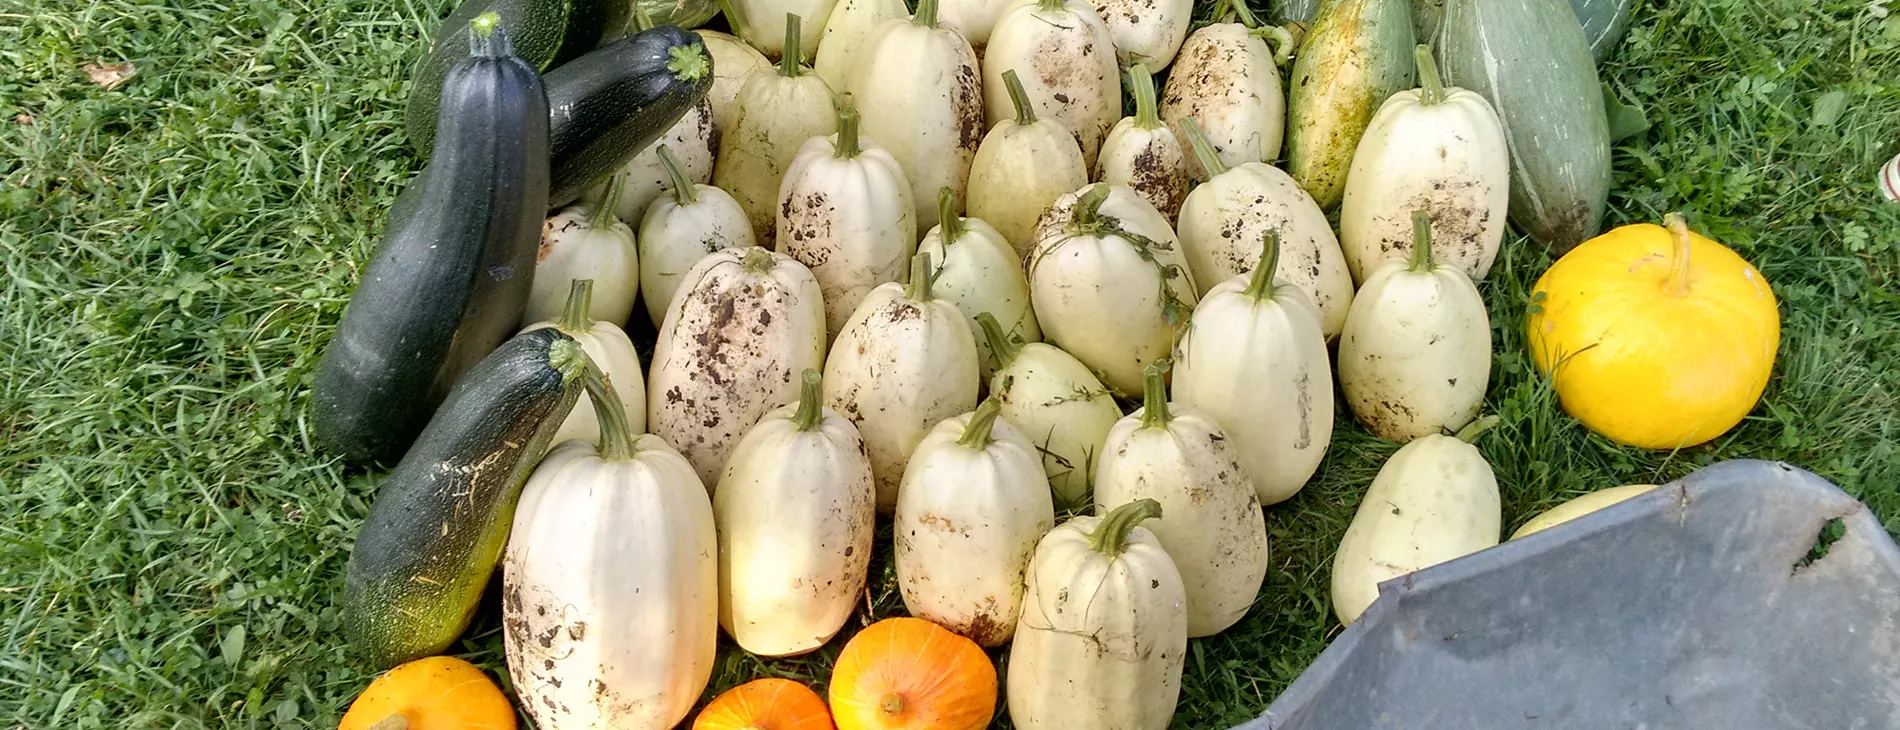 Harvest of different types of squashes